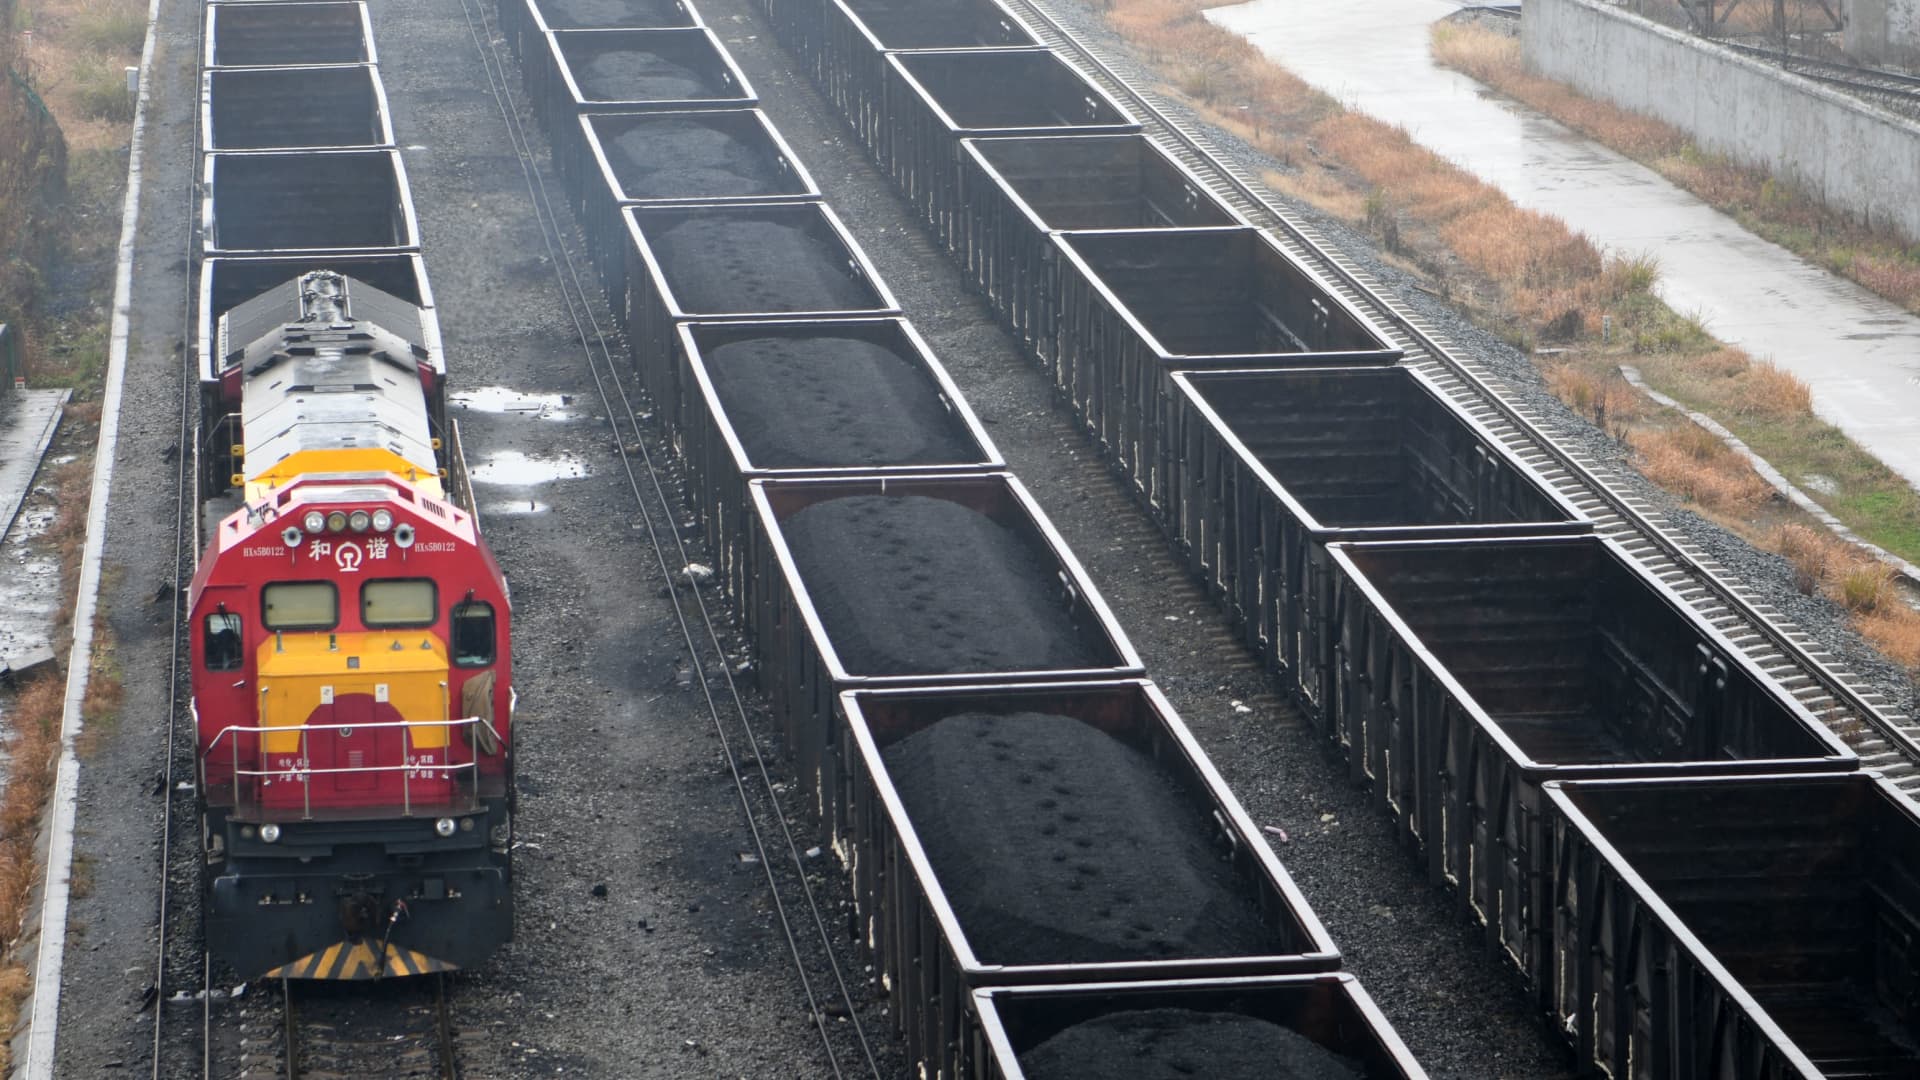 Employees work on a freight train loaded with coal at Jiangxi Coal Reserve Center on January 29, 2022 in China. China imported 30% less coal from Russia year-on-year in March, according to Reuters.